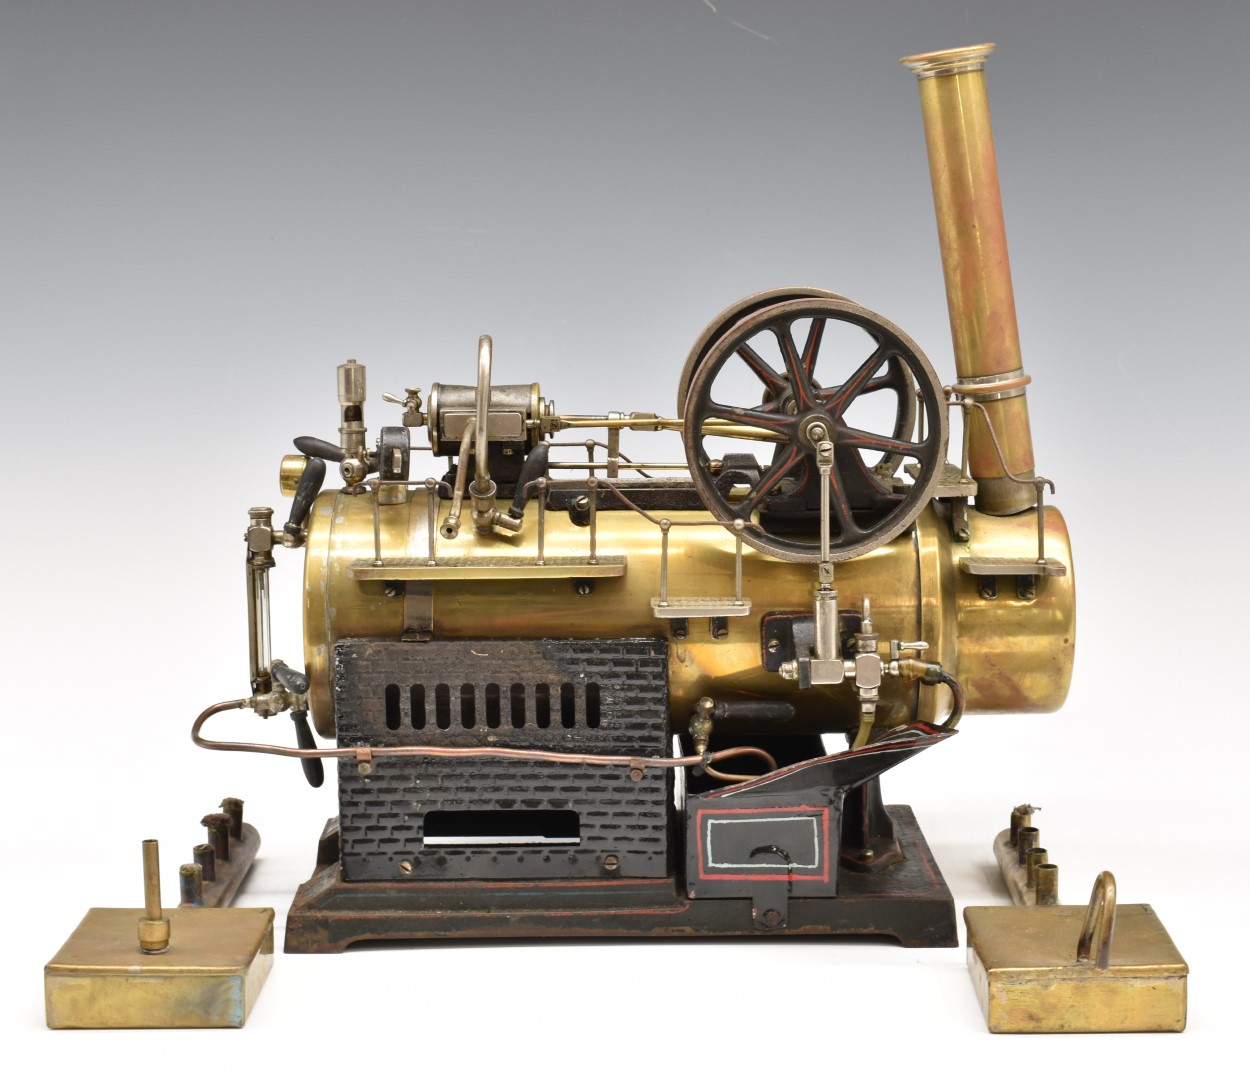 Doll model 520 overtype live steam engine with single cylinder, with twin fly wheels, lever safety